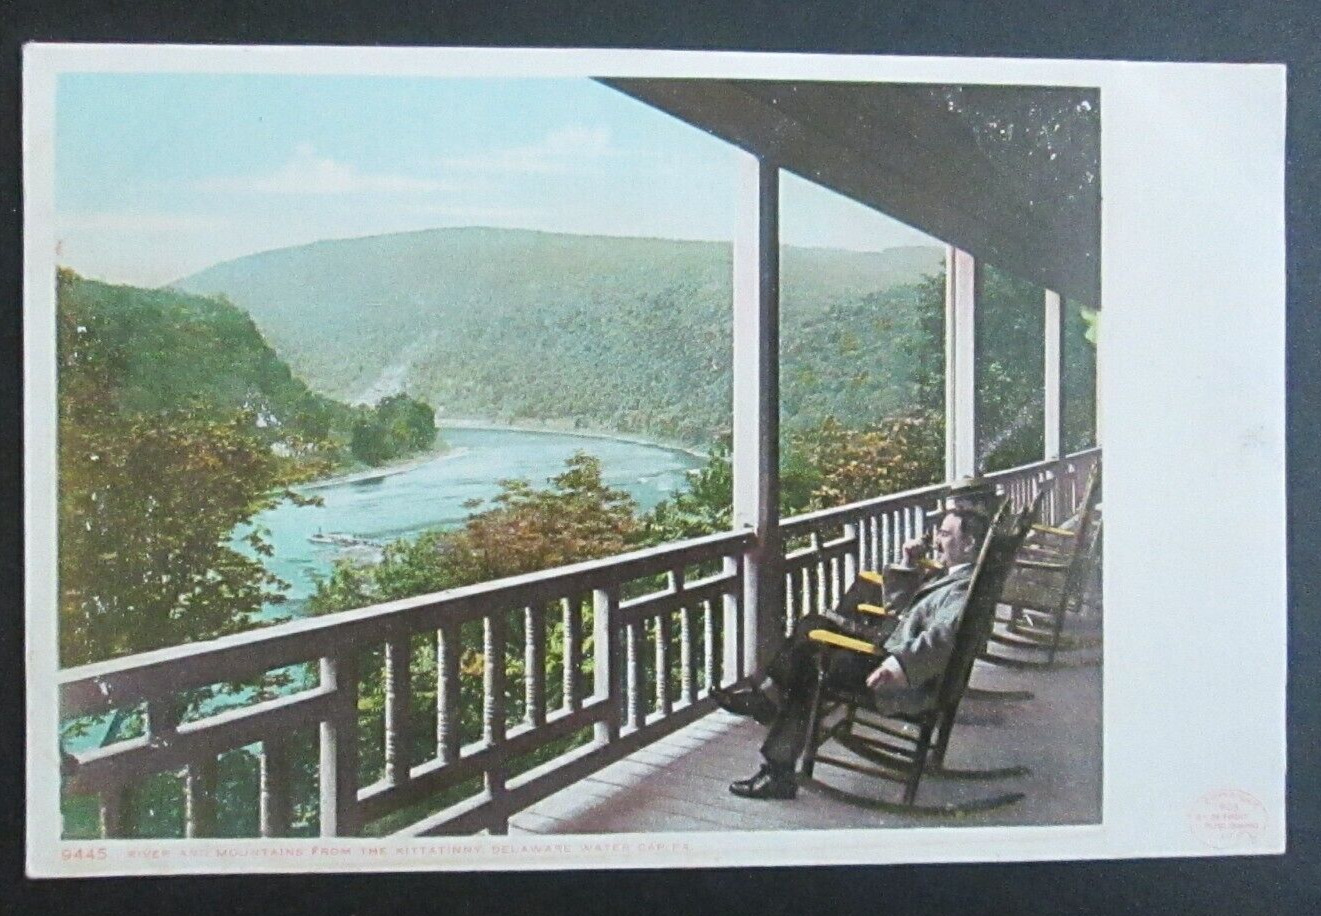 River and Mountains from Kittatinny Delaware Water Gap PA Unposted Postcard